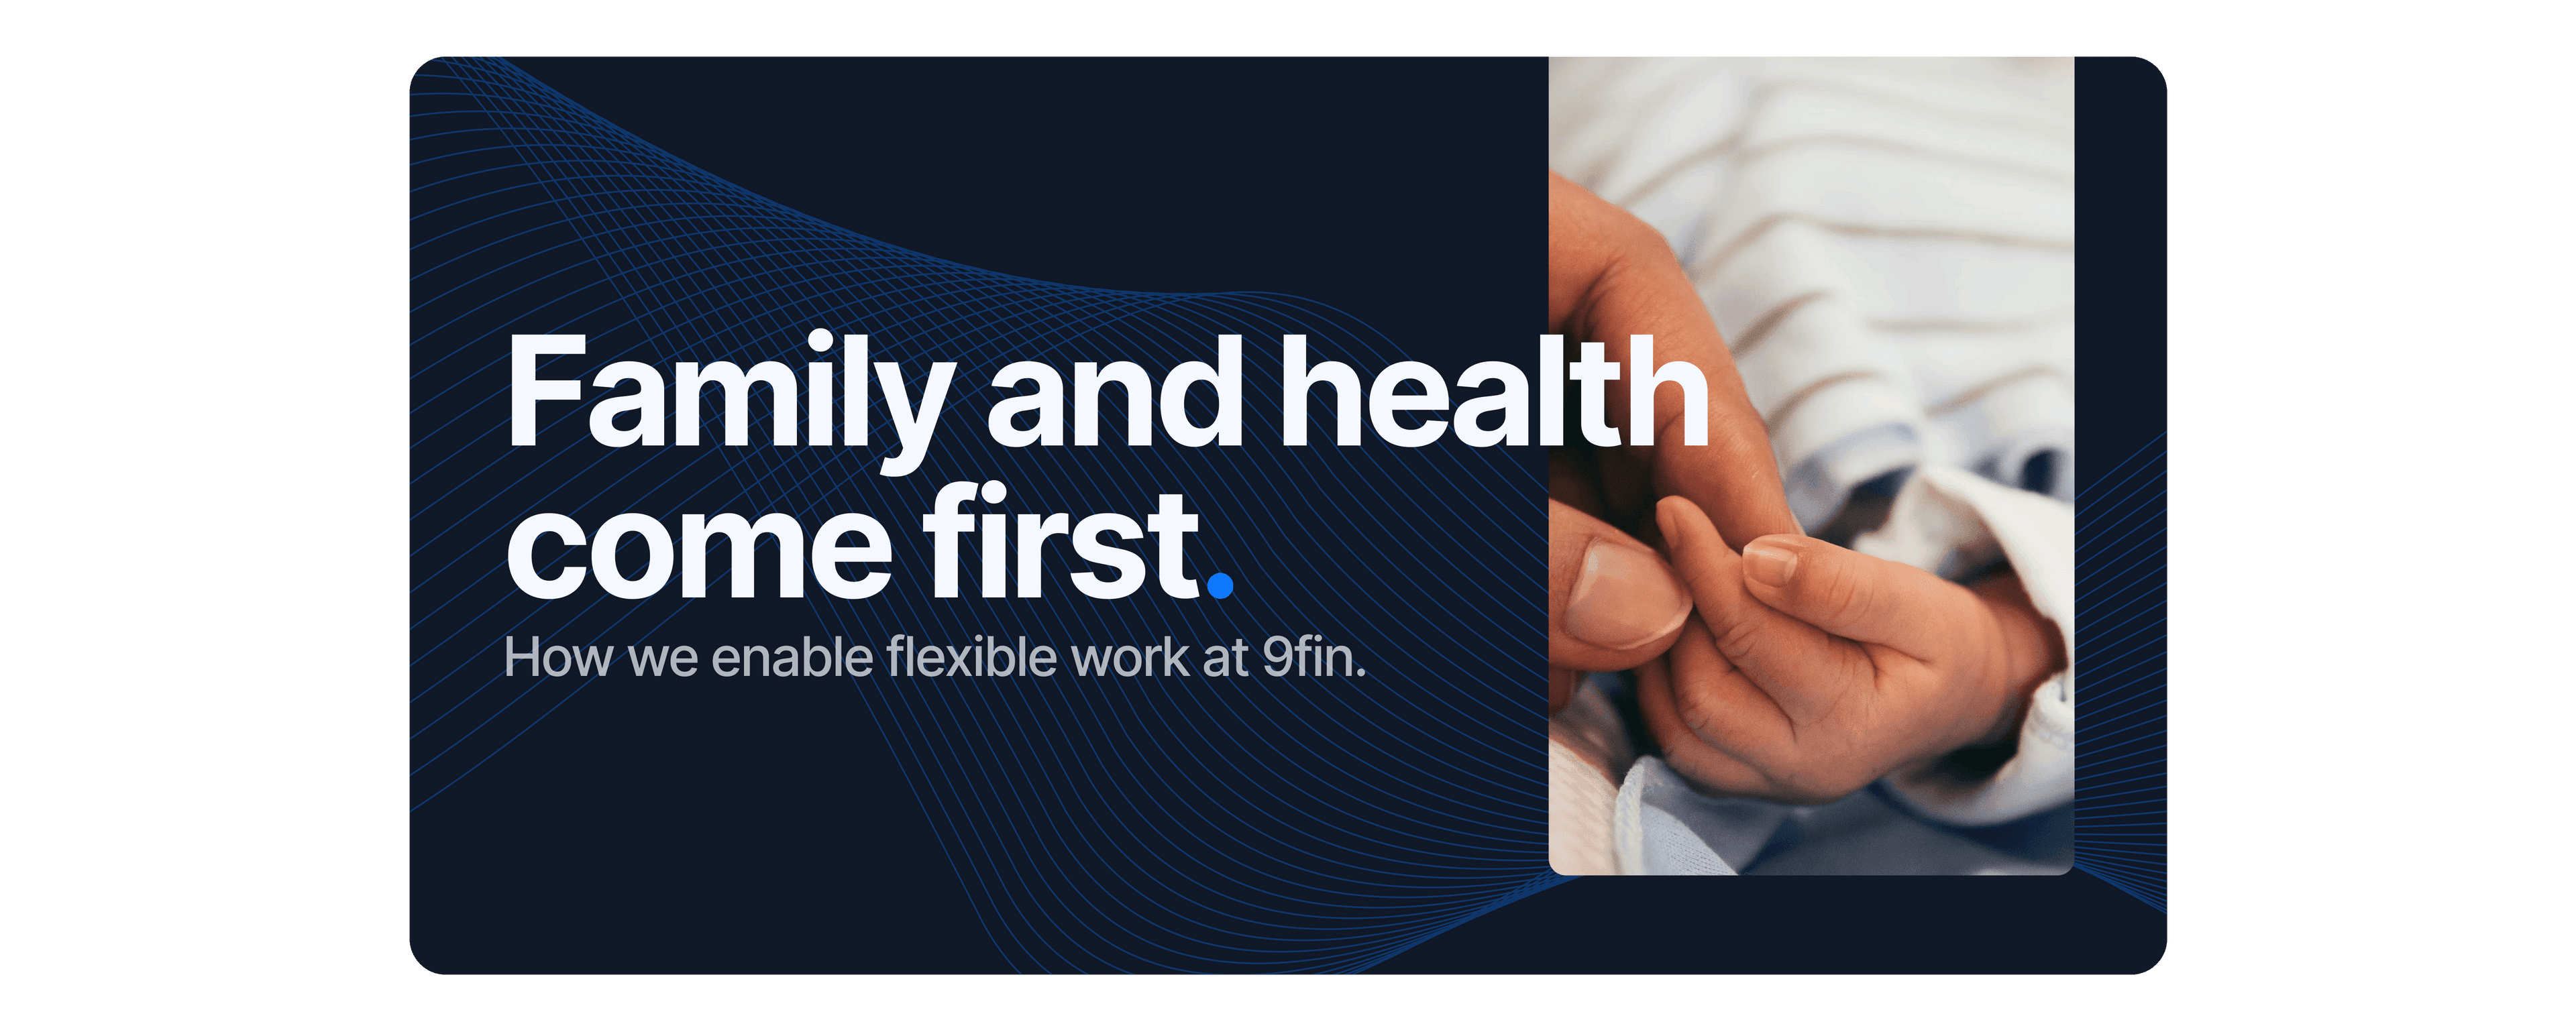 Family and health come first: enabling flexible work at 9fin